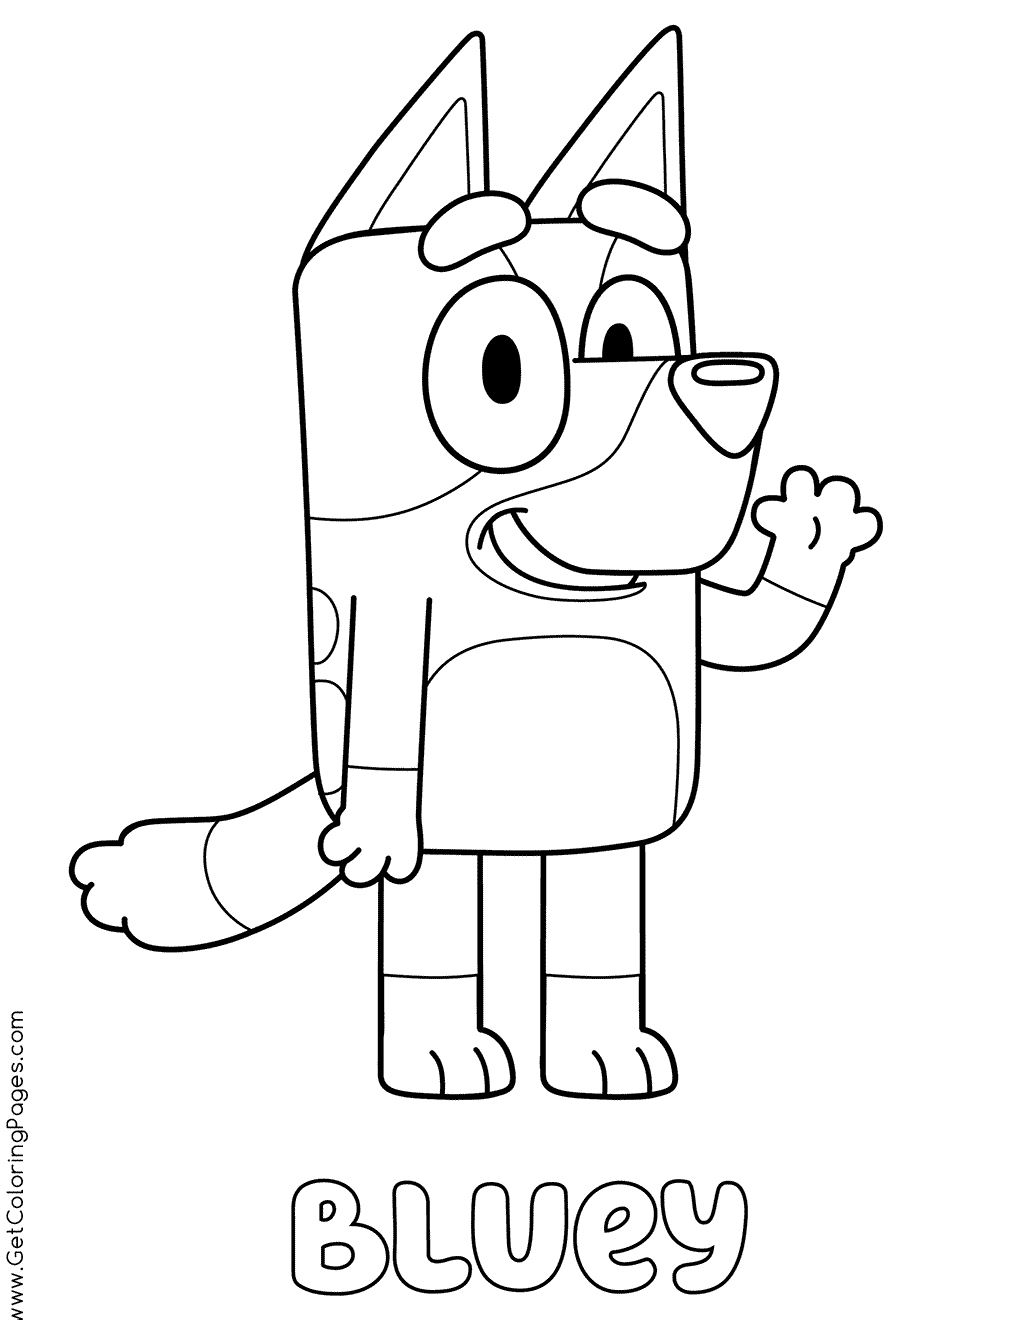 Bluey Colouring Pages - Get Coloring Pages